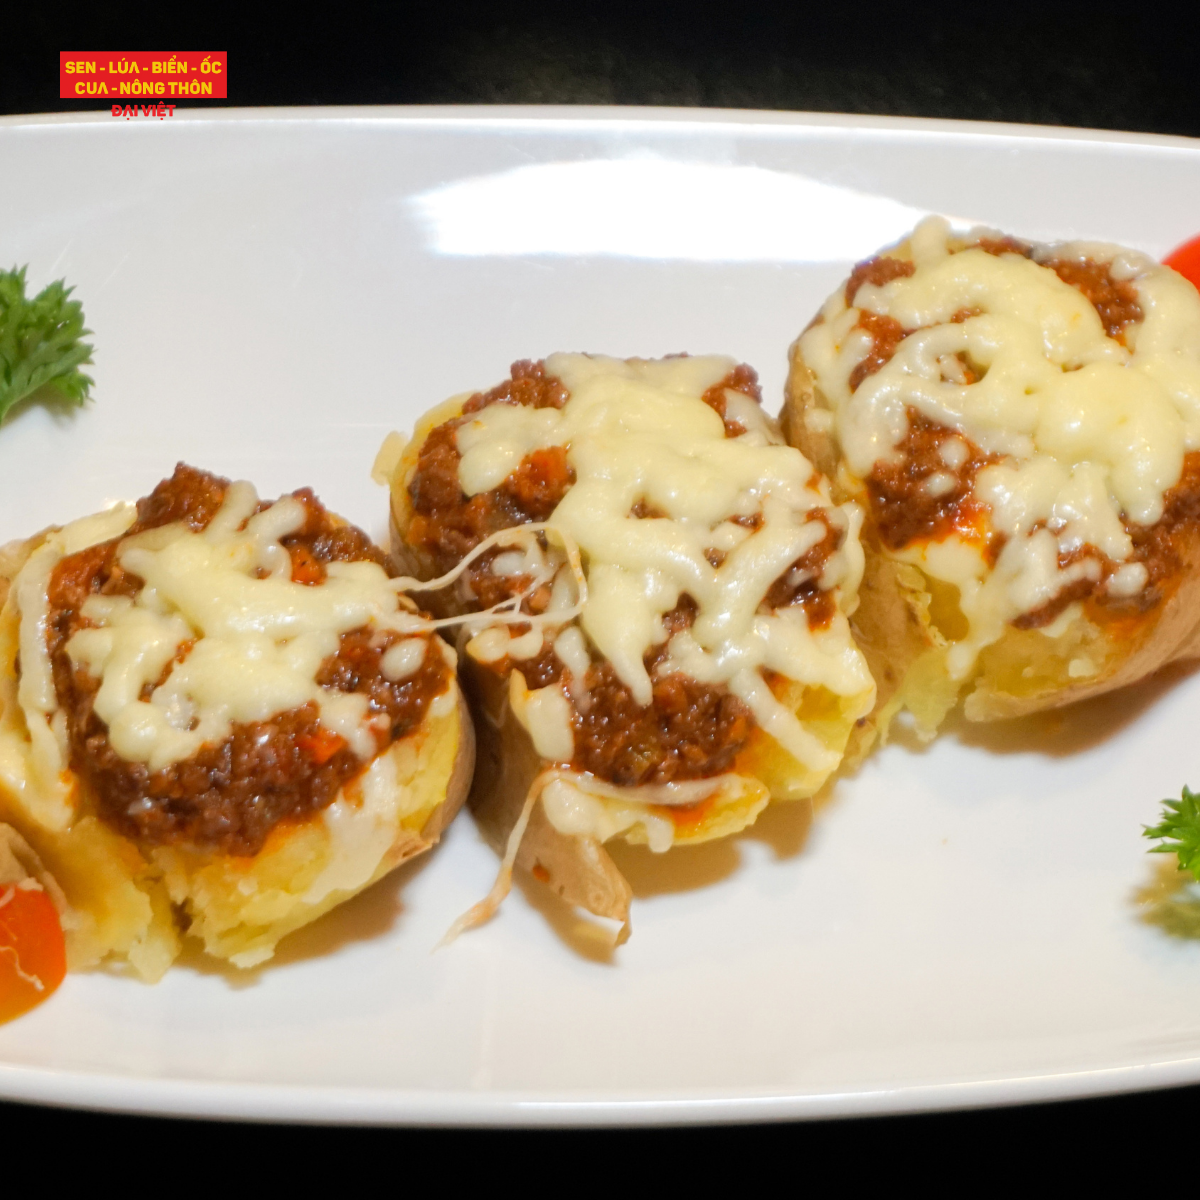  Baked Potato With Chili Con Carne & Cheese 